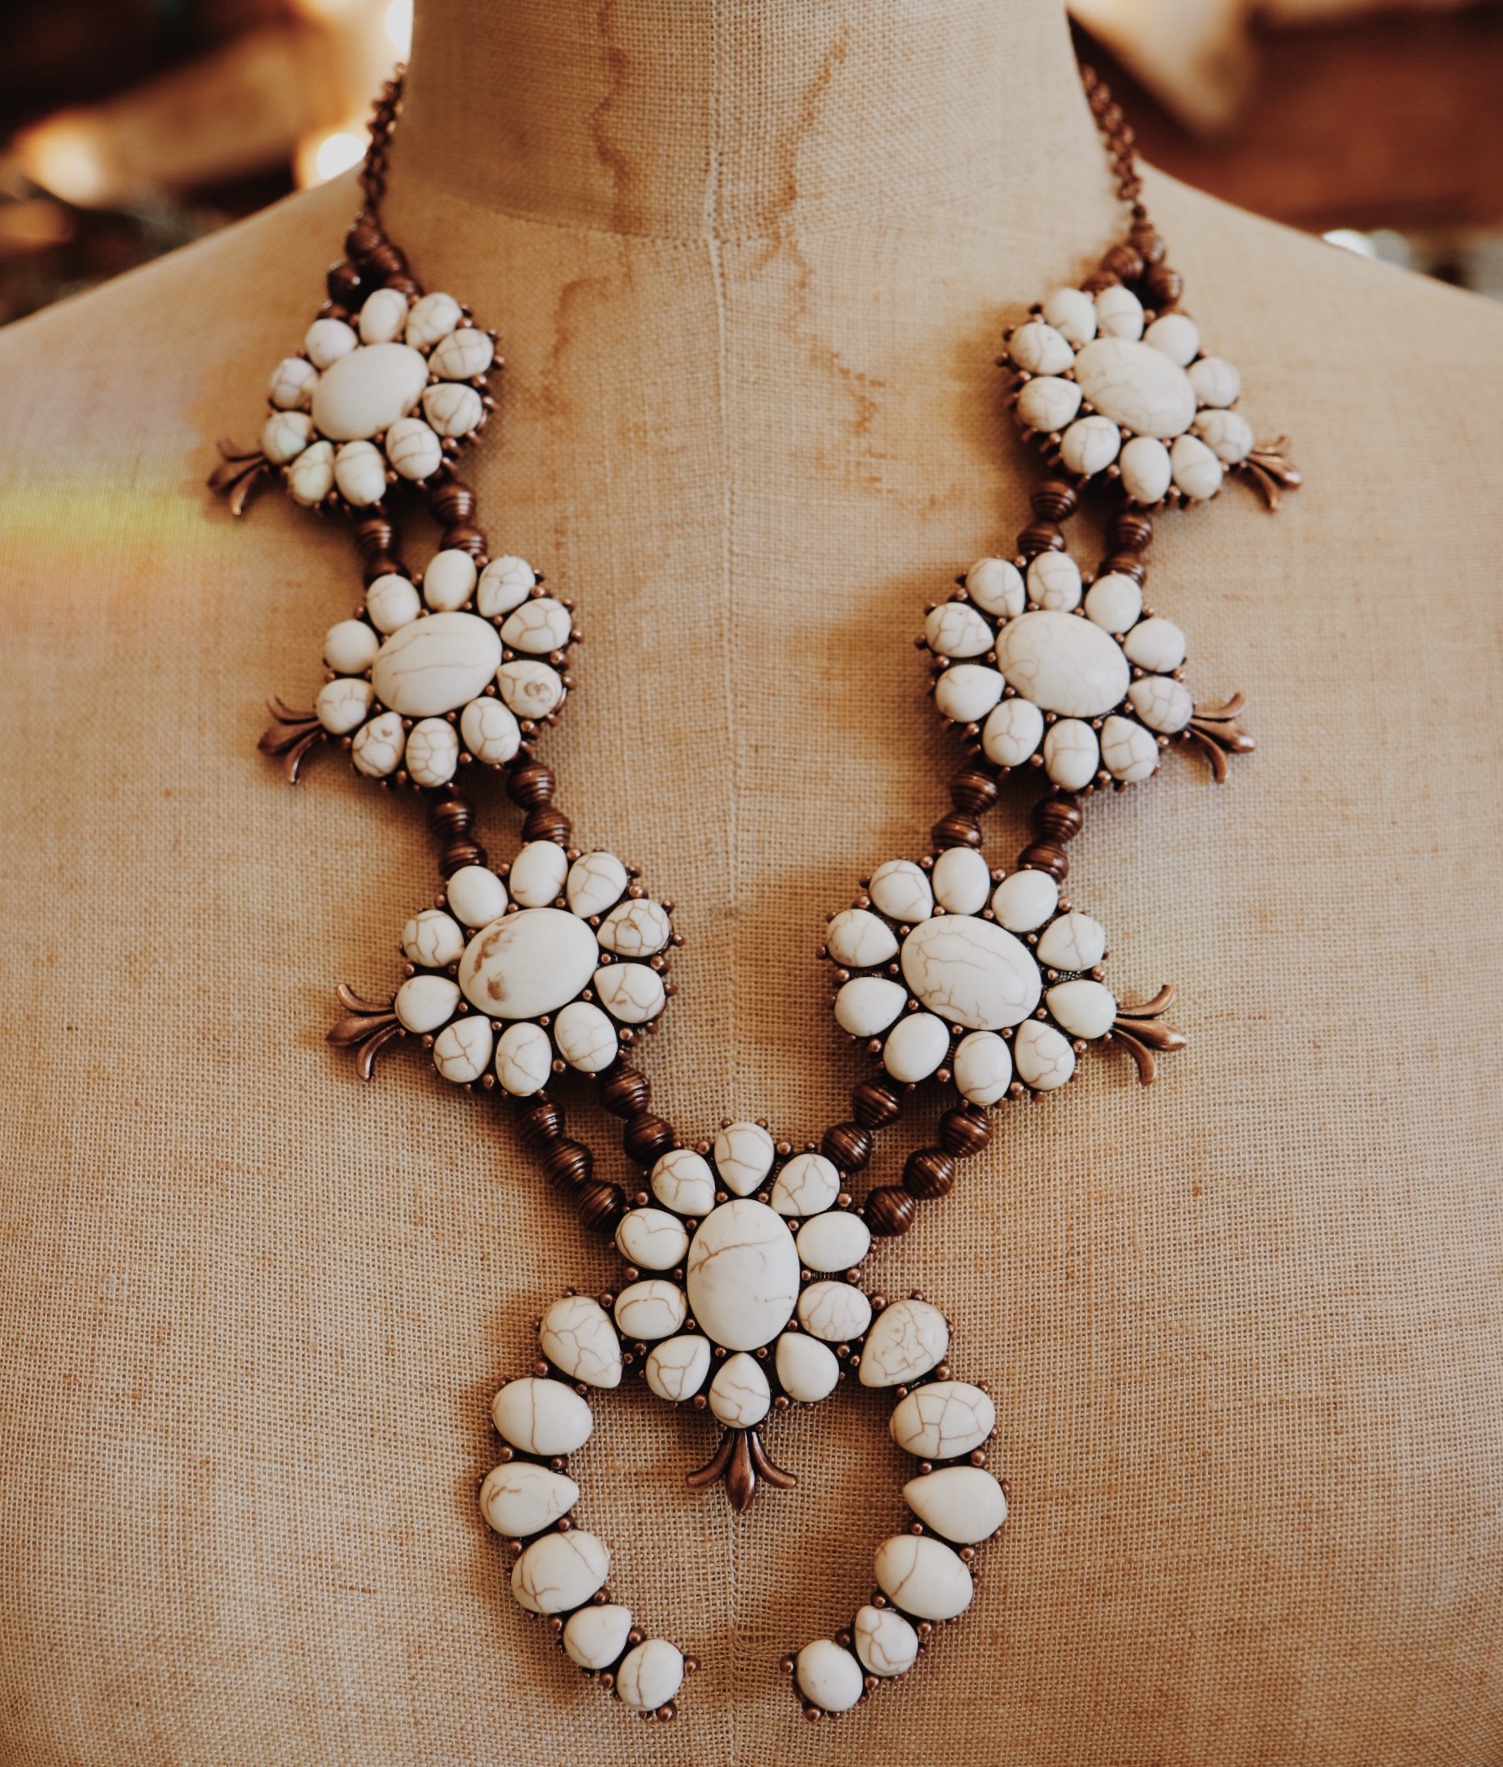 This necklace makes getting dressed up so easy! Instantly eclectic! This necklace has a 3 inch adjustable extender.